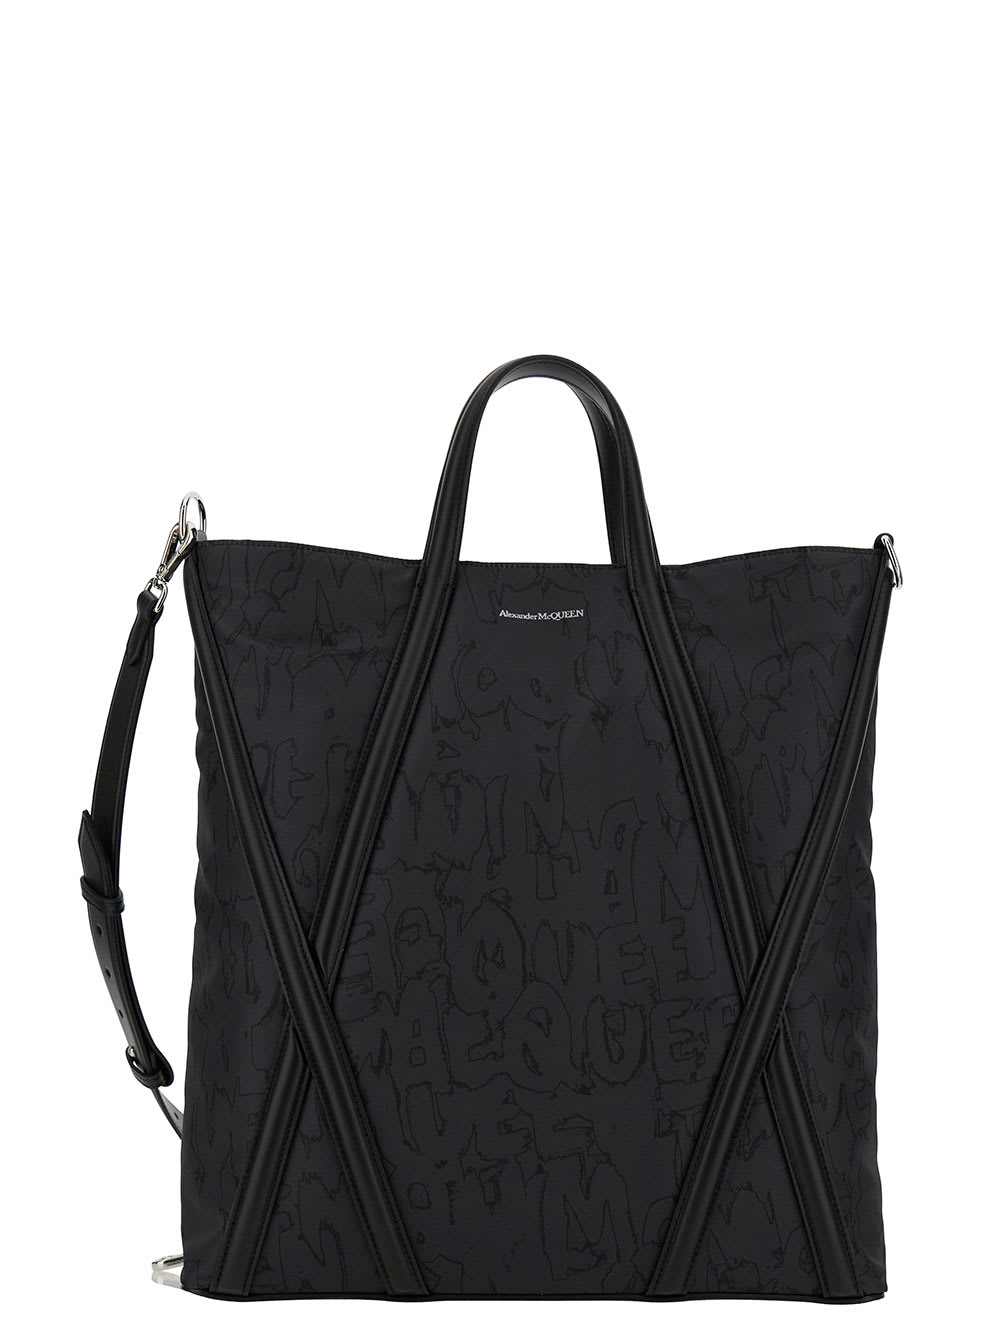 Alexander Mcqueen The Harness Black Tote Bag With Logo Detail In Nylon Man